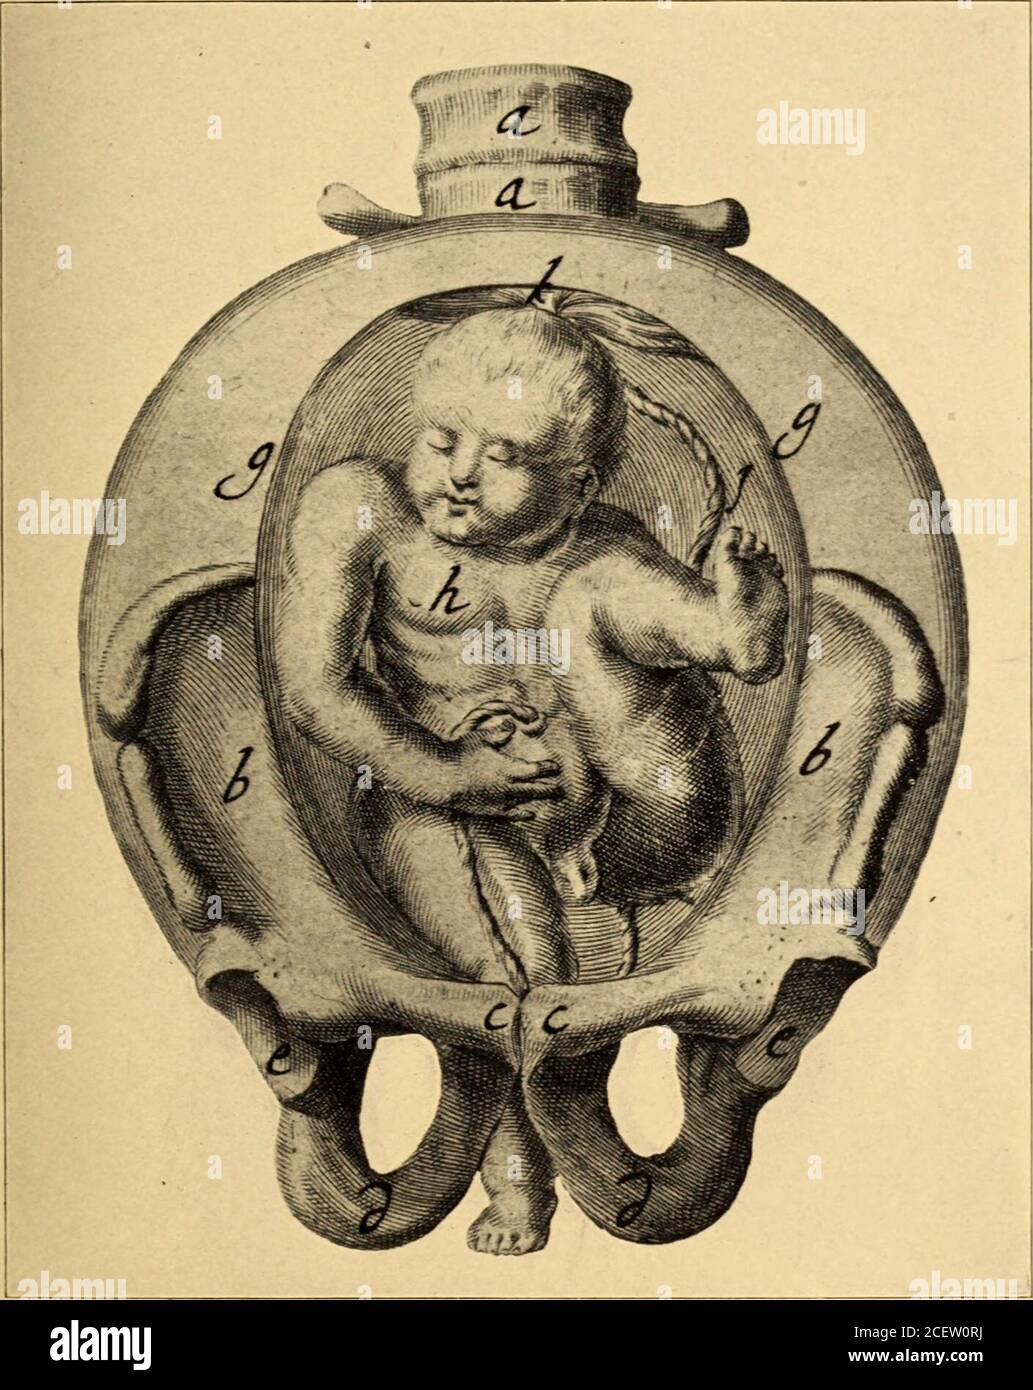 . Operazioni dell'Associazione chirurgica e Ginecologica del Sud. Fig. 15.-Copperplate from the Thesaurus Anatomicus, Ruysch, 1701.. FLG. i6.-Woodcut from the New Light for Obstetricians and Midwives,Deventer, 1701. Foto Stock